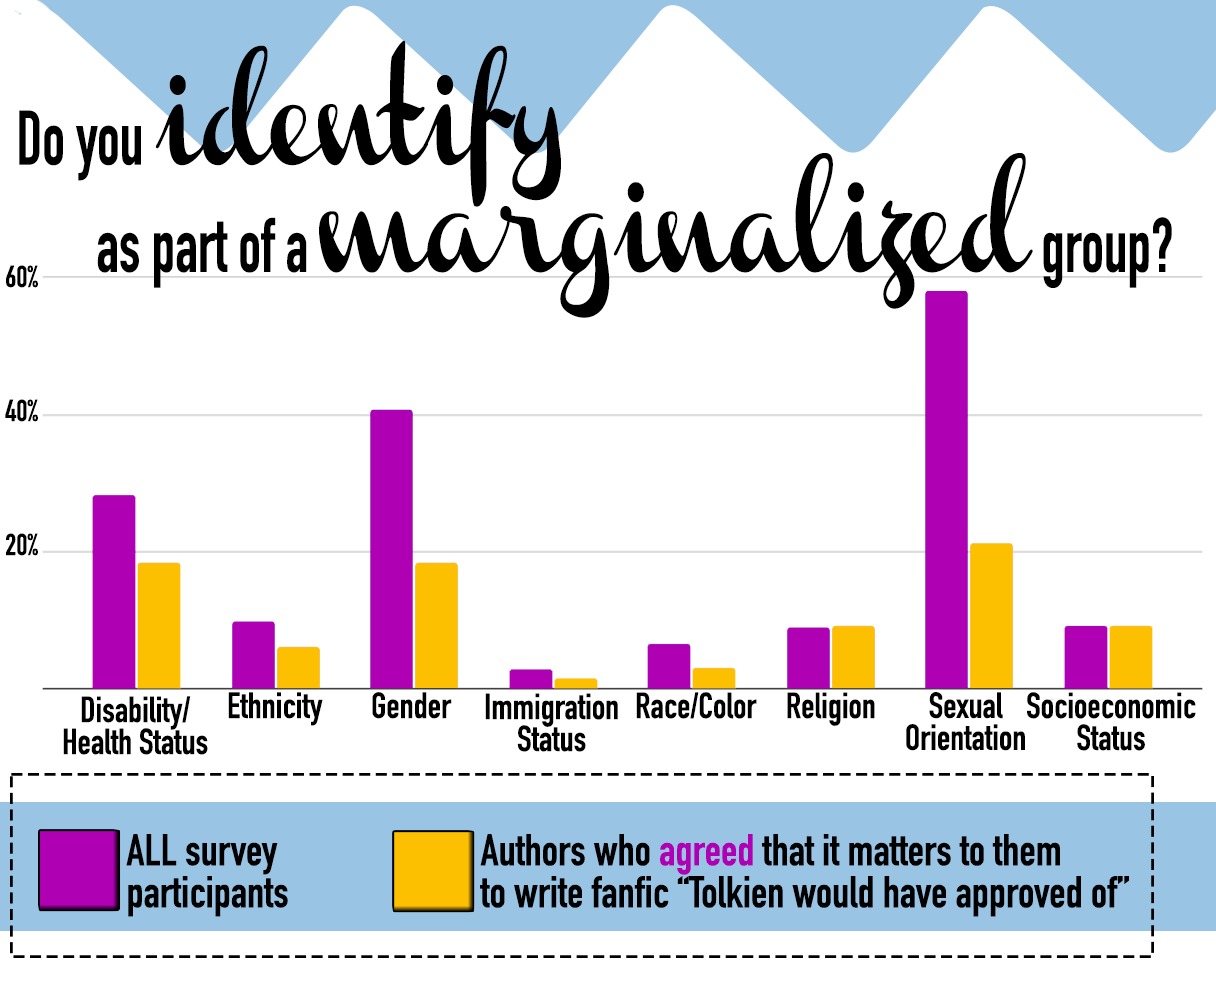 Do you identify as part of a marginalized group? All survey participants: Disability/Health Status 29%, Ethnicity 10%, Gender 41%, Immigration Status 3%, Race/Color 6%, Religion 9%, Sexual Orientation 58%, Socioeconomic Status 9%. Authors who agreed that it matters to them to write fanfic "Tolkien would have approved of": Disability/Health Status 18%, Ethnicity 6%, Gender 18%, Immigration Status 2%, Race/Color 3%, Religion 9%, Sexual Orientation 21%, Socioeconomic Status 9%